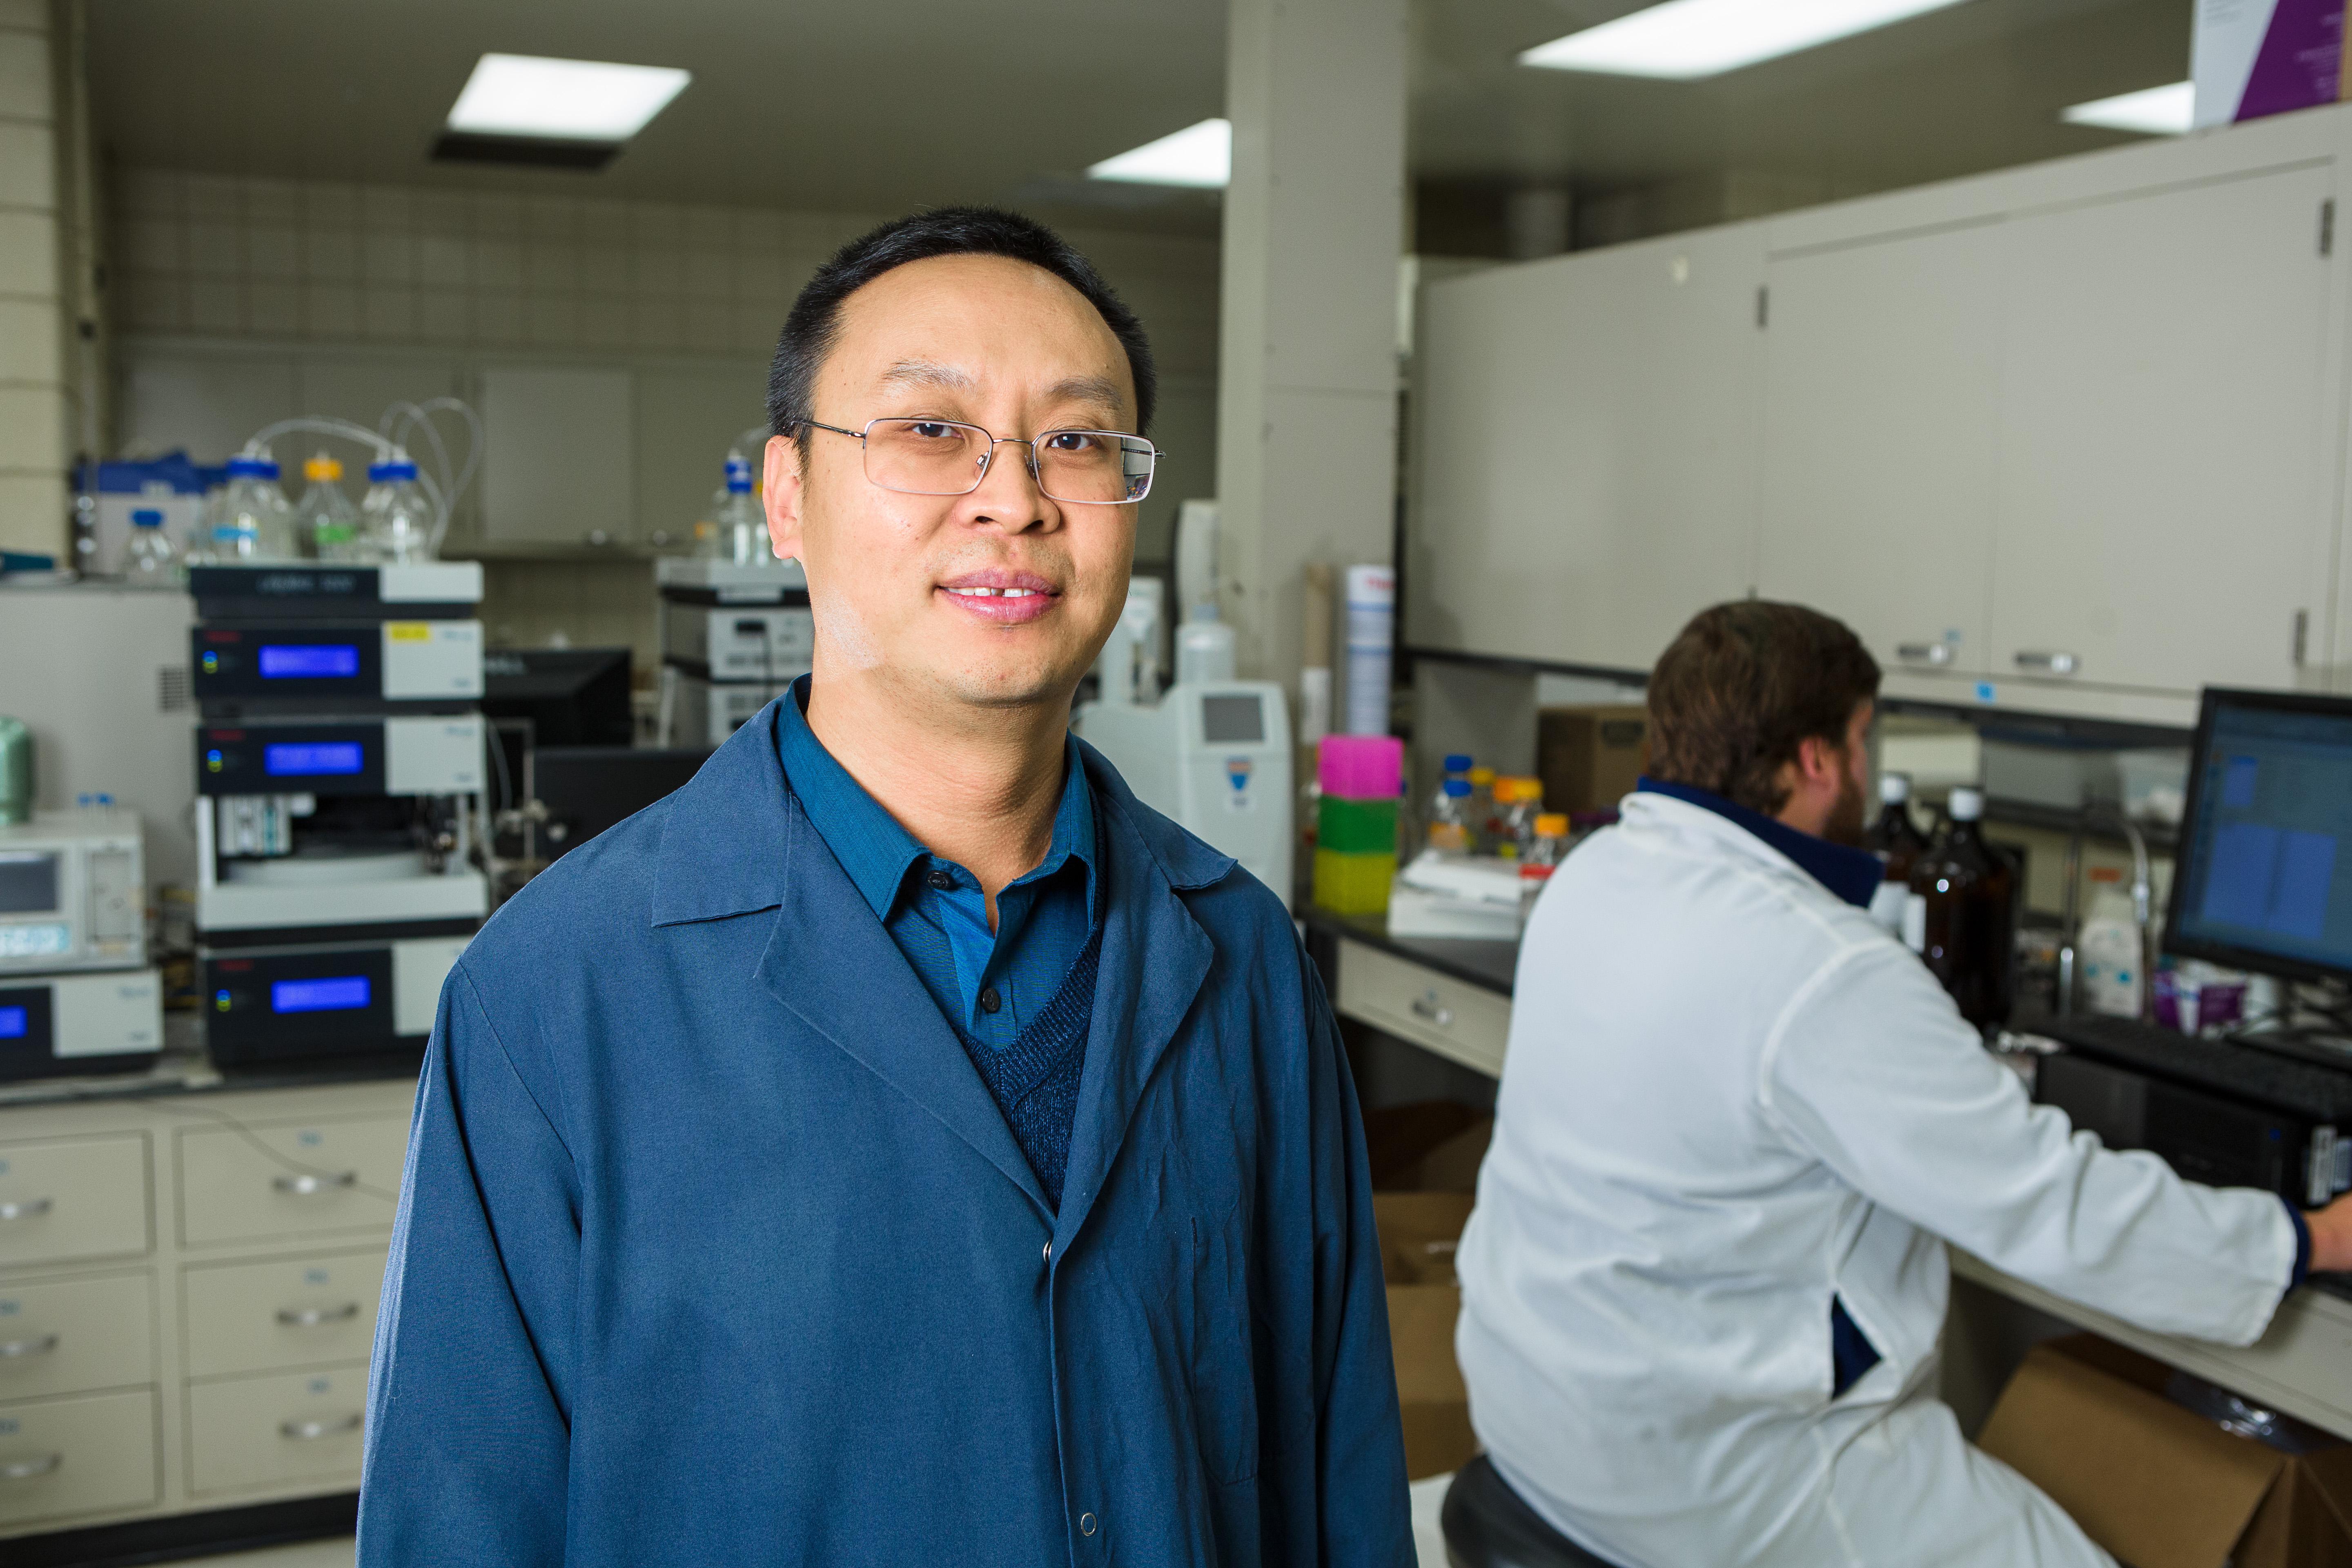 Jian Shi is the lead researcher on the grant studying how to remove sulfur from pine byproducts used in biofuel production. Photo by Matt Barton, UK agricultural communications.